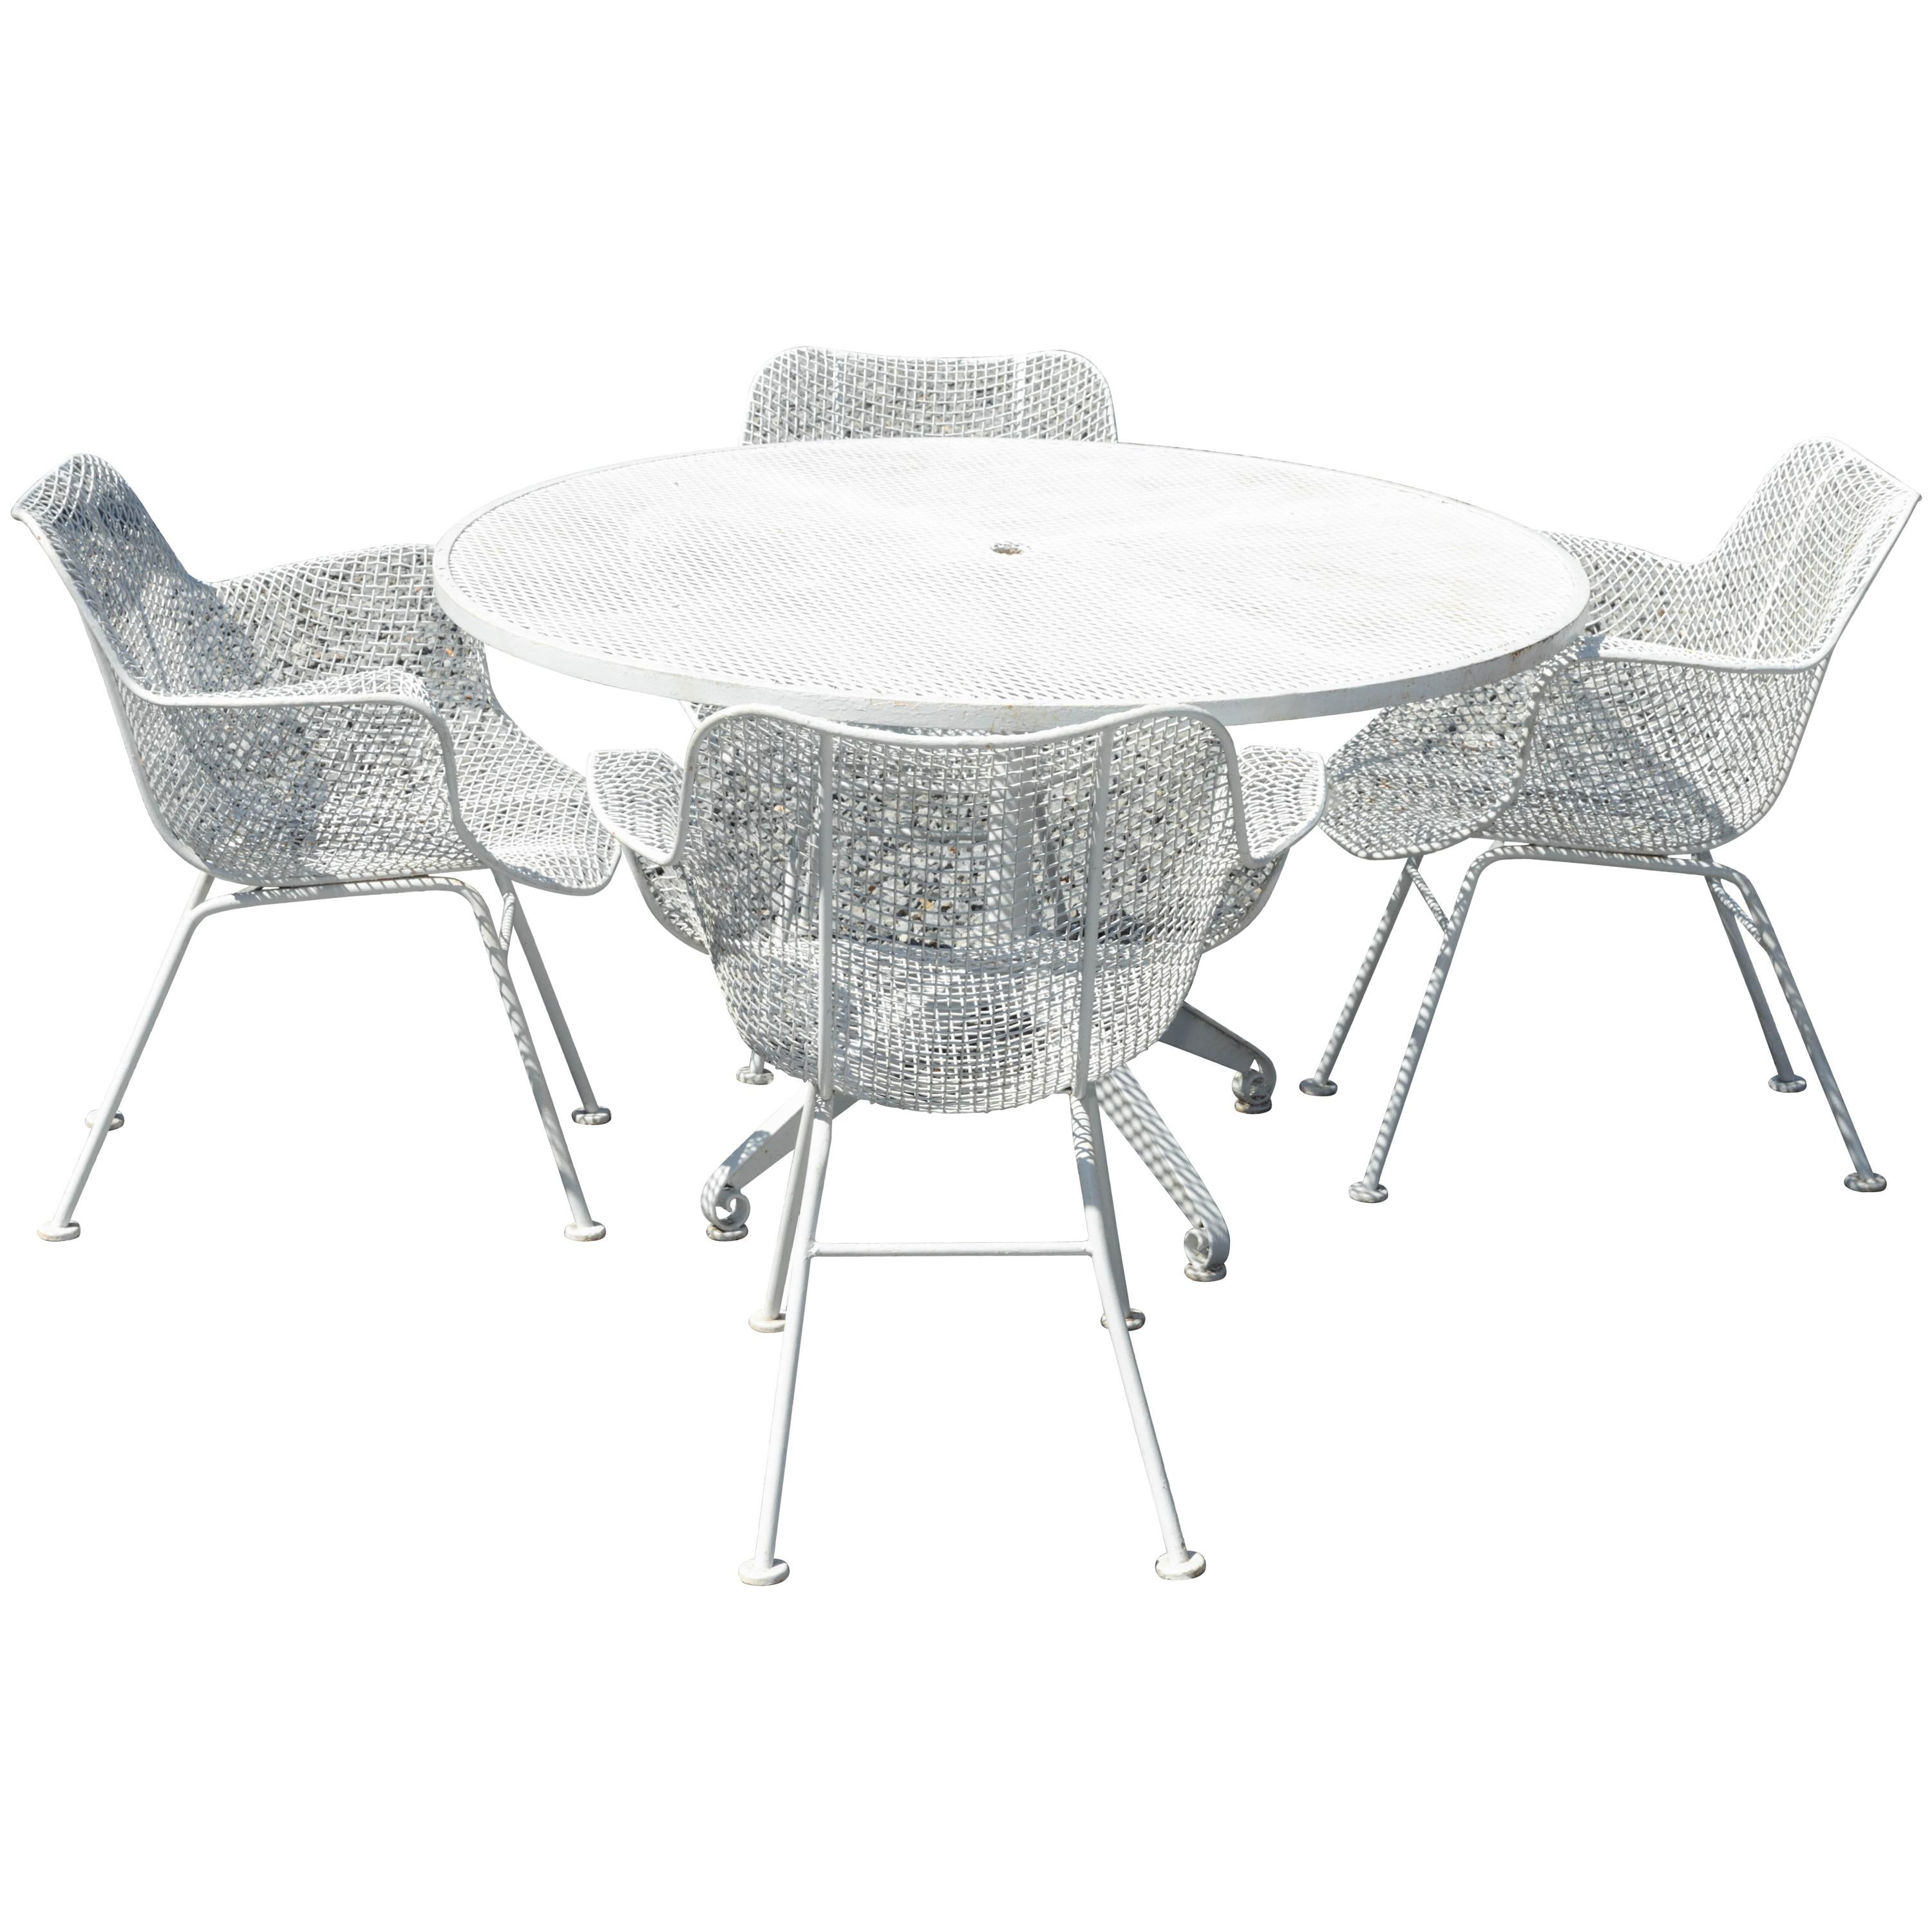 Mid-Century Modern Metal Wire Garden Table with 4 Chairs